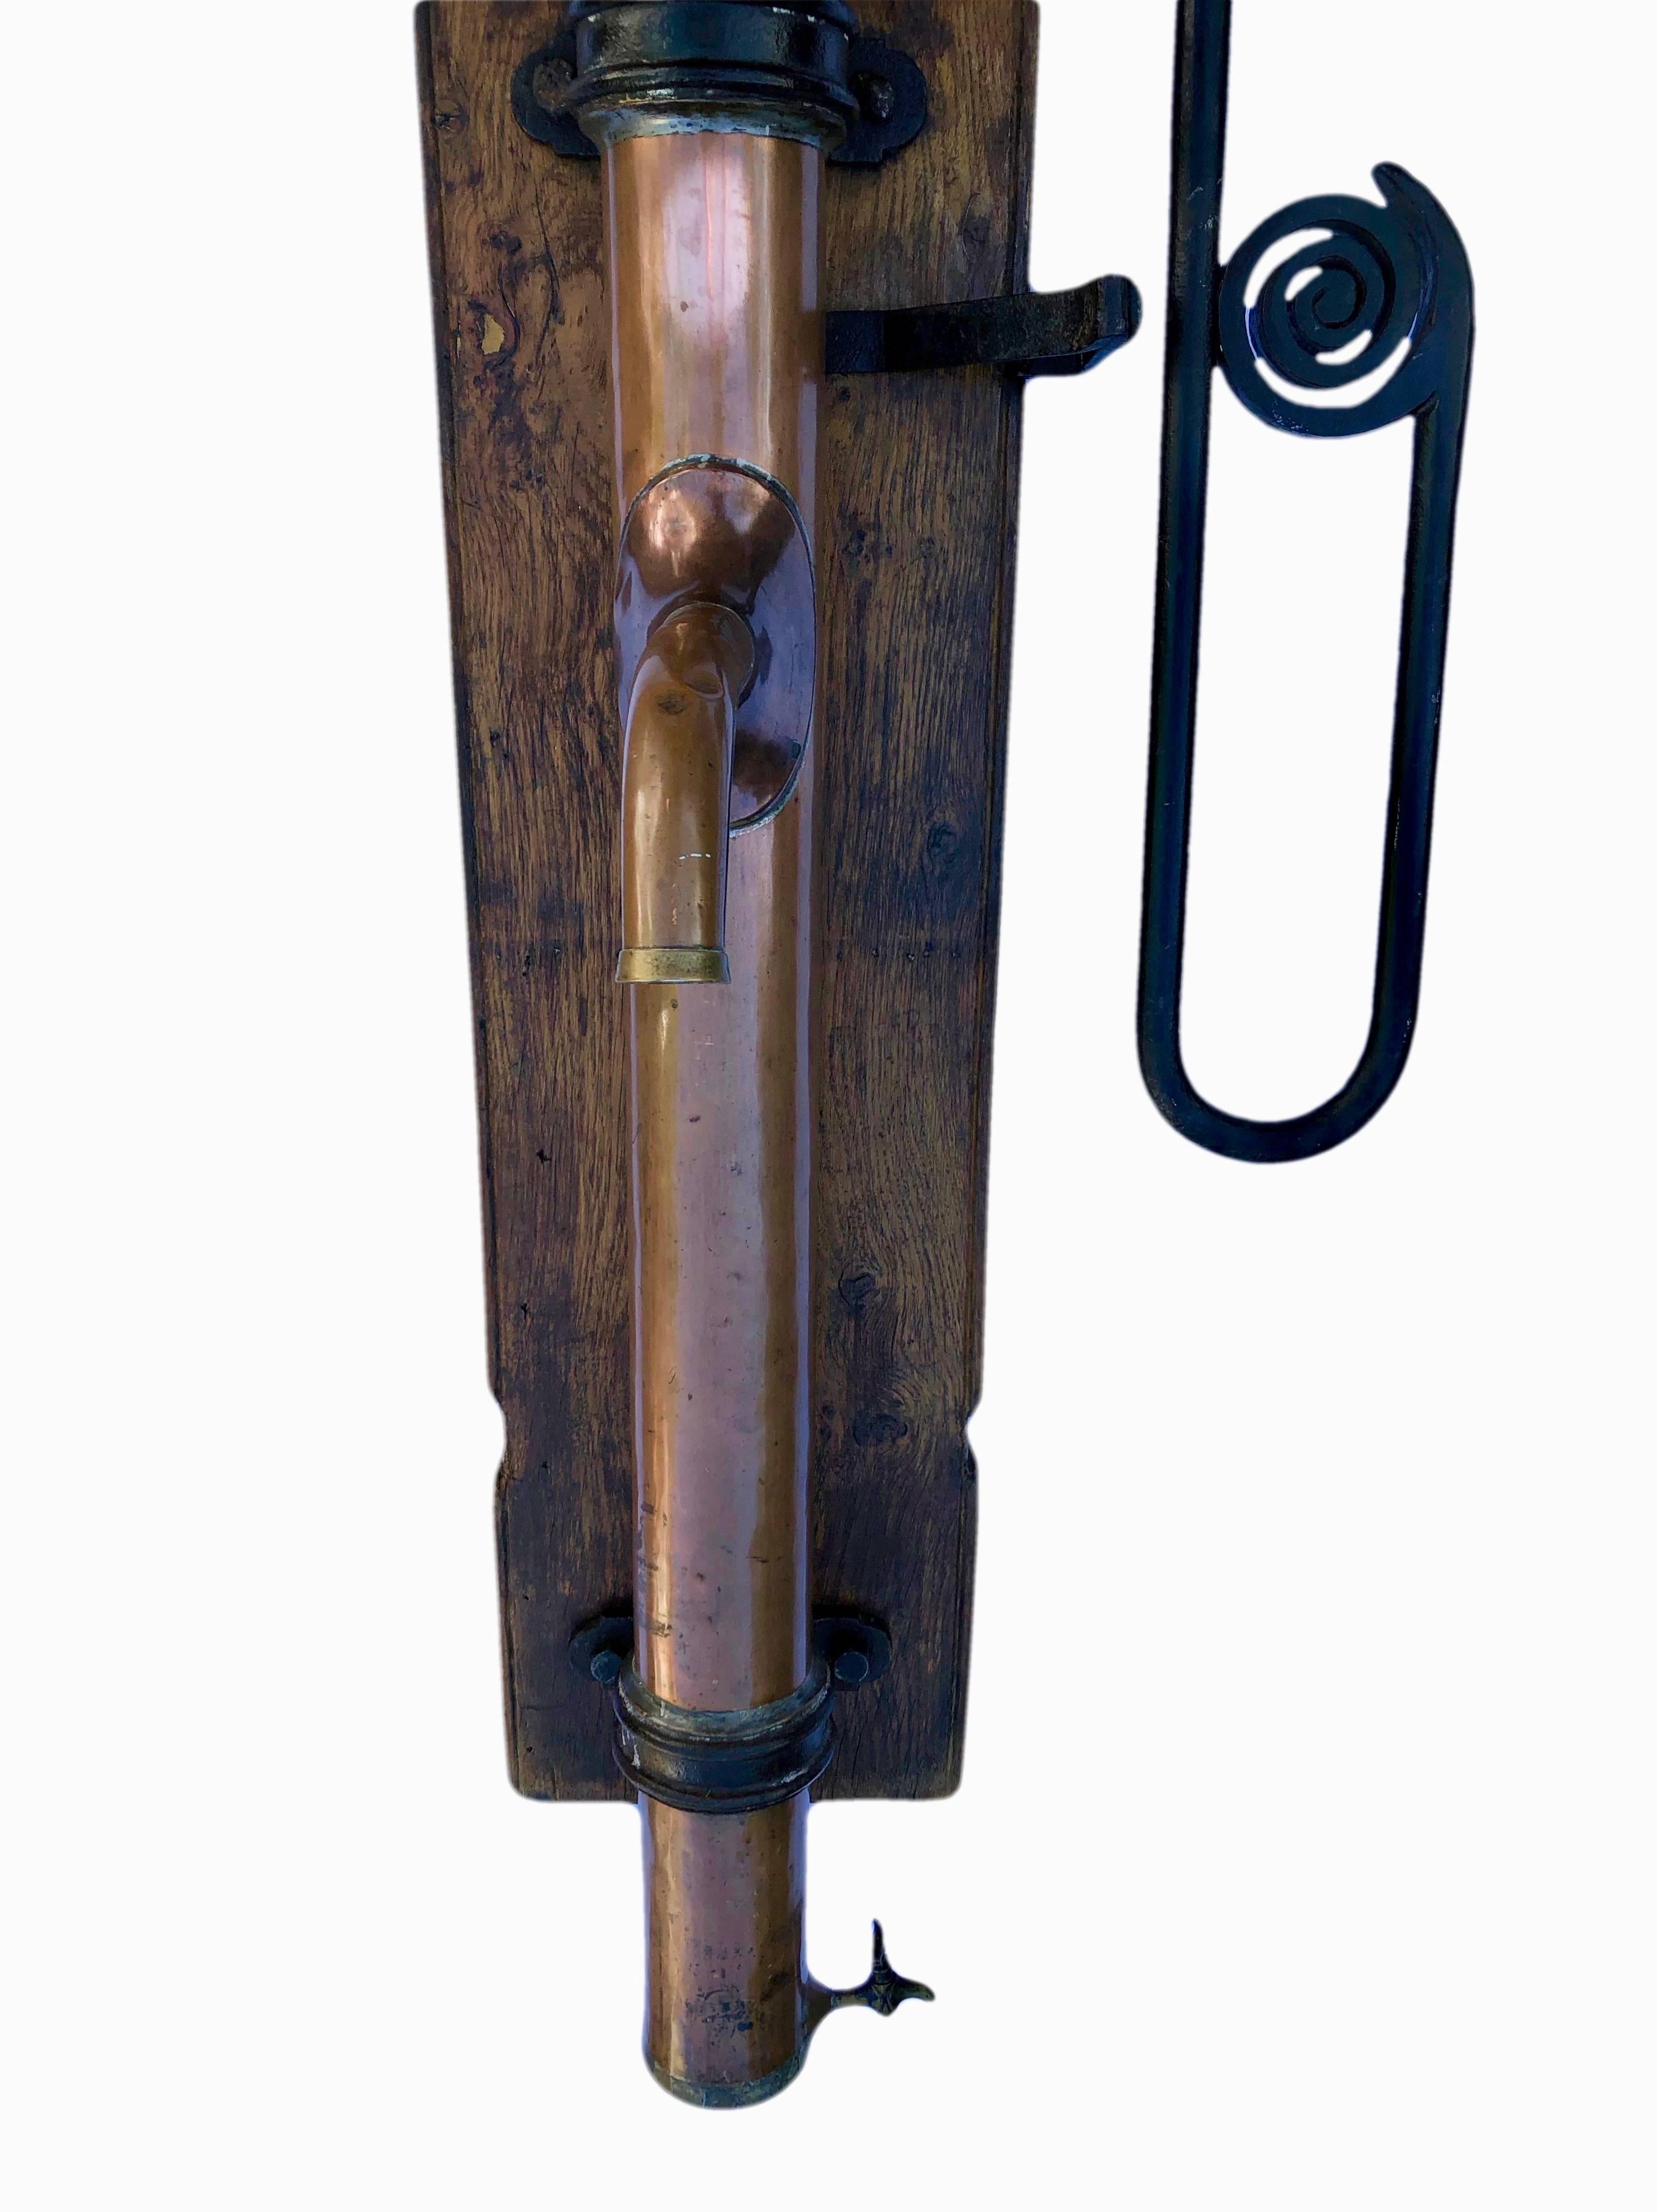 This is a rare French copper water hand pump Louis XIVth. It was originally used in a French castle kitchen. It has black iron accents and is mounted on a large old wood plank. It is a stunning piece that can still be used as a water pump today,